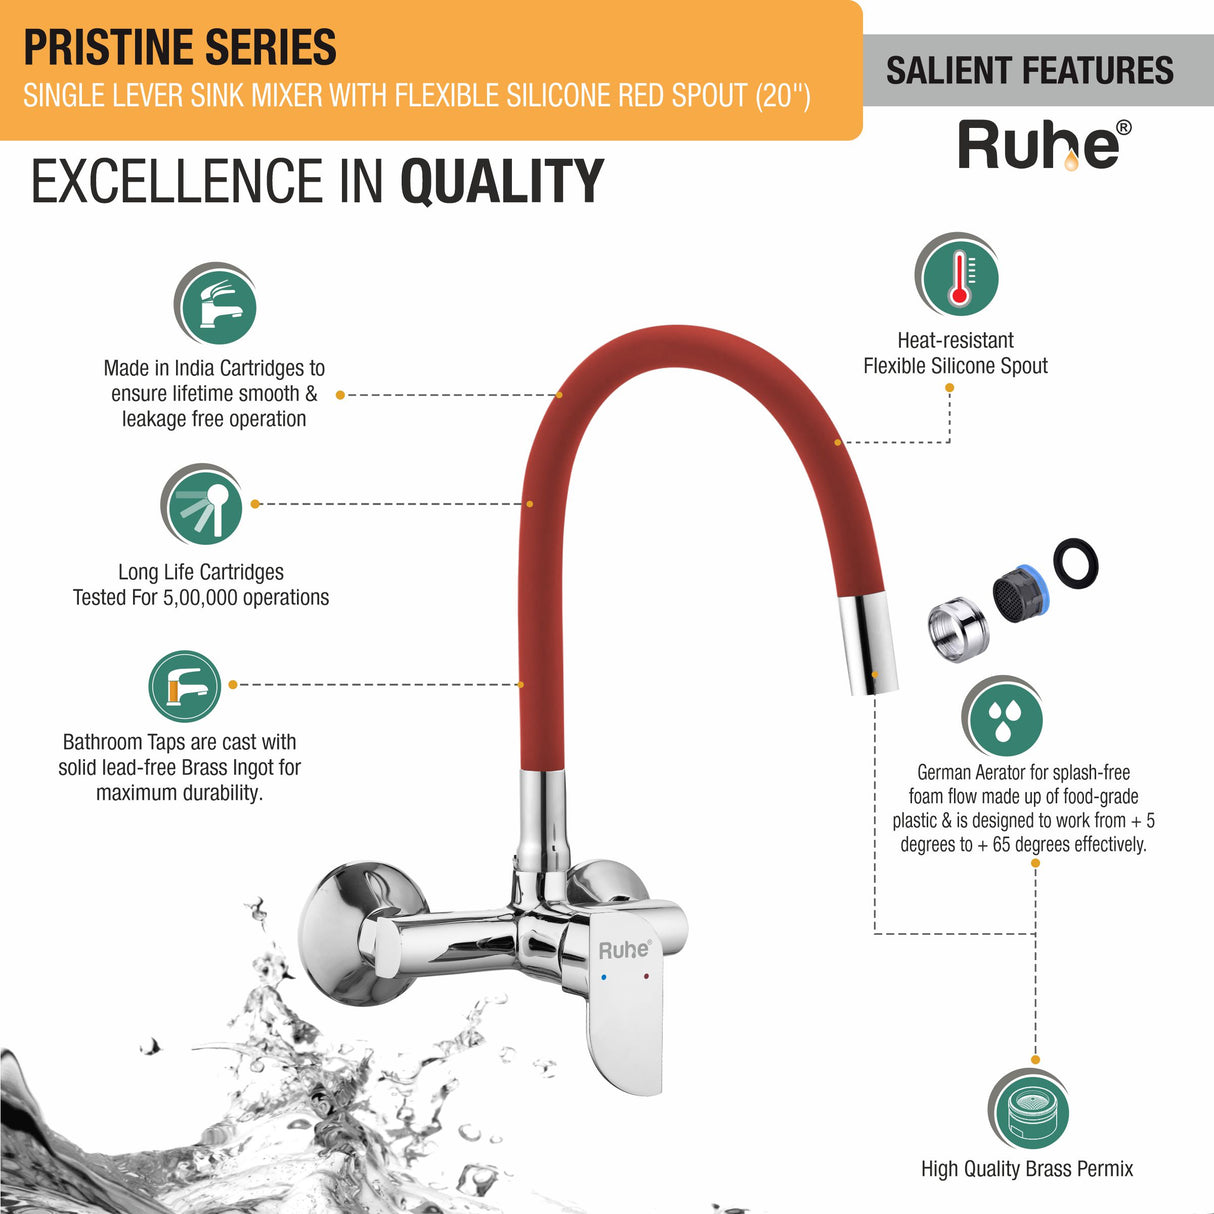 Pristine Single Lever Wall-mount Sink Mixer Brass Faucet with Red Silicone Spout - by Ruhe®